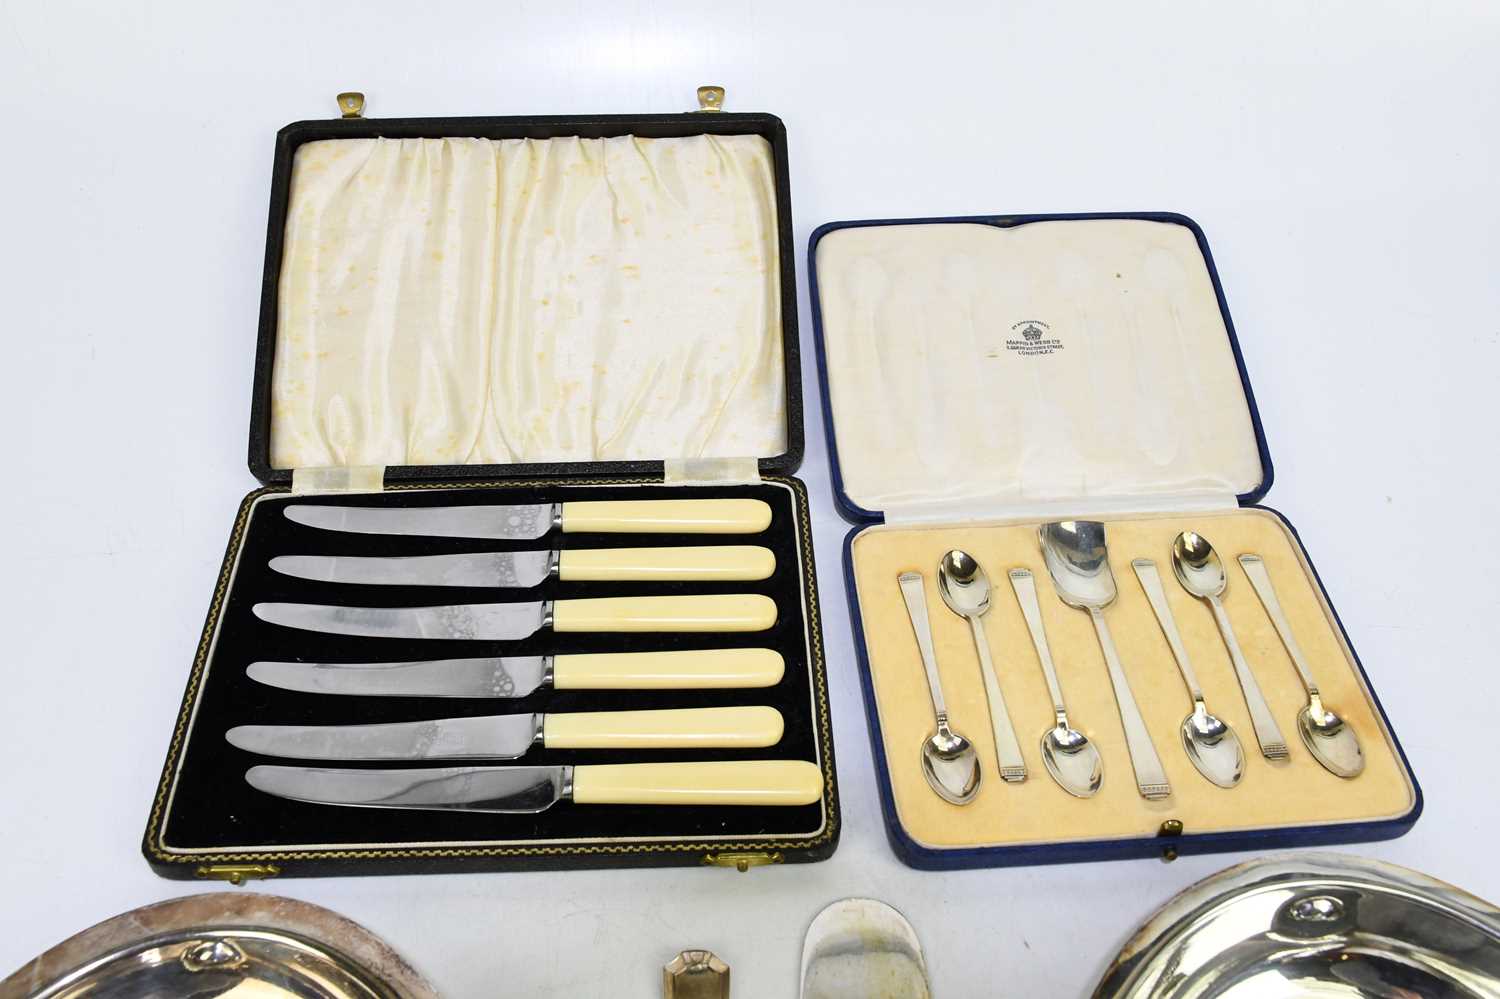 A small selection of silver plated flatware including serving slices, forks, etc. - Image 4 of 4